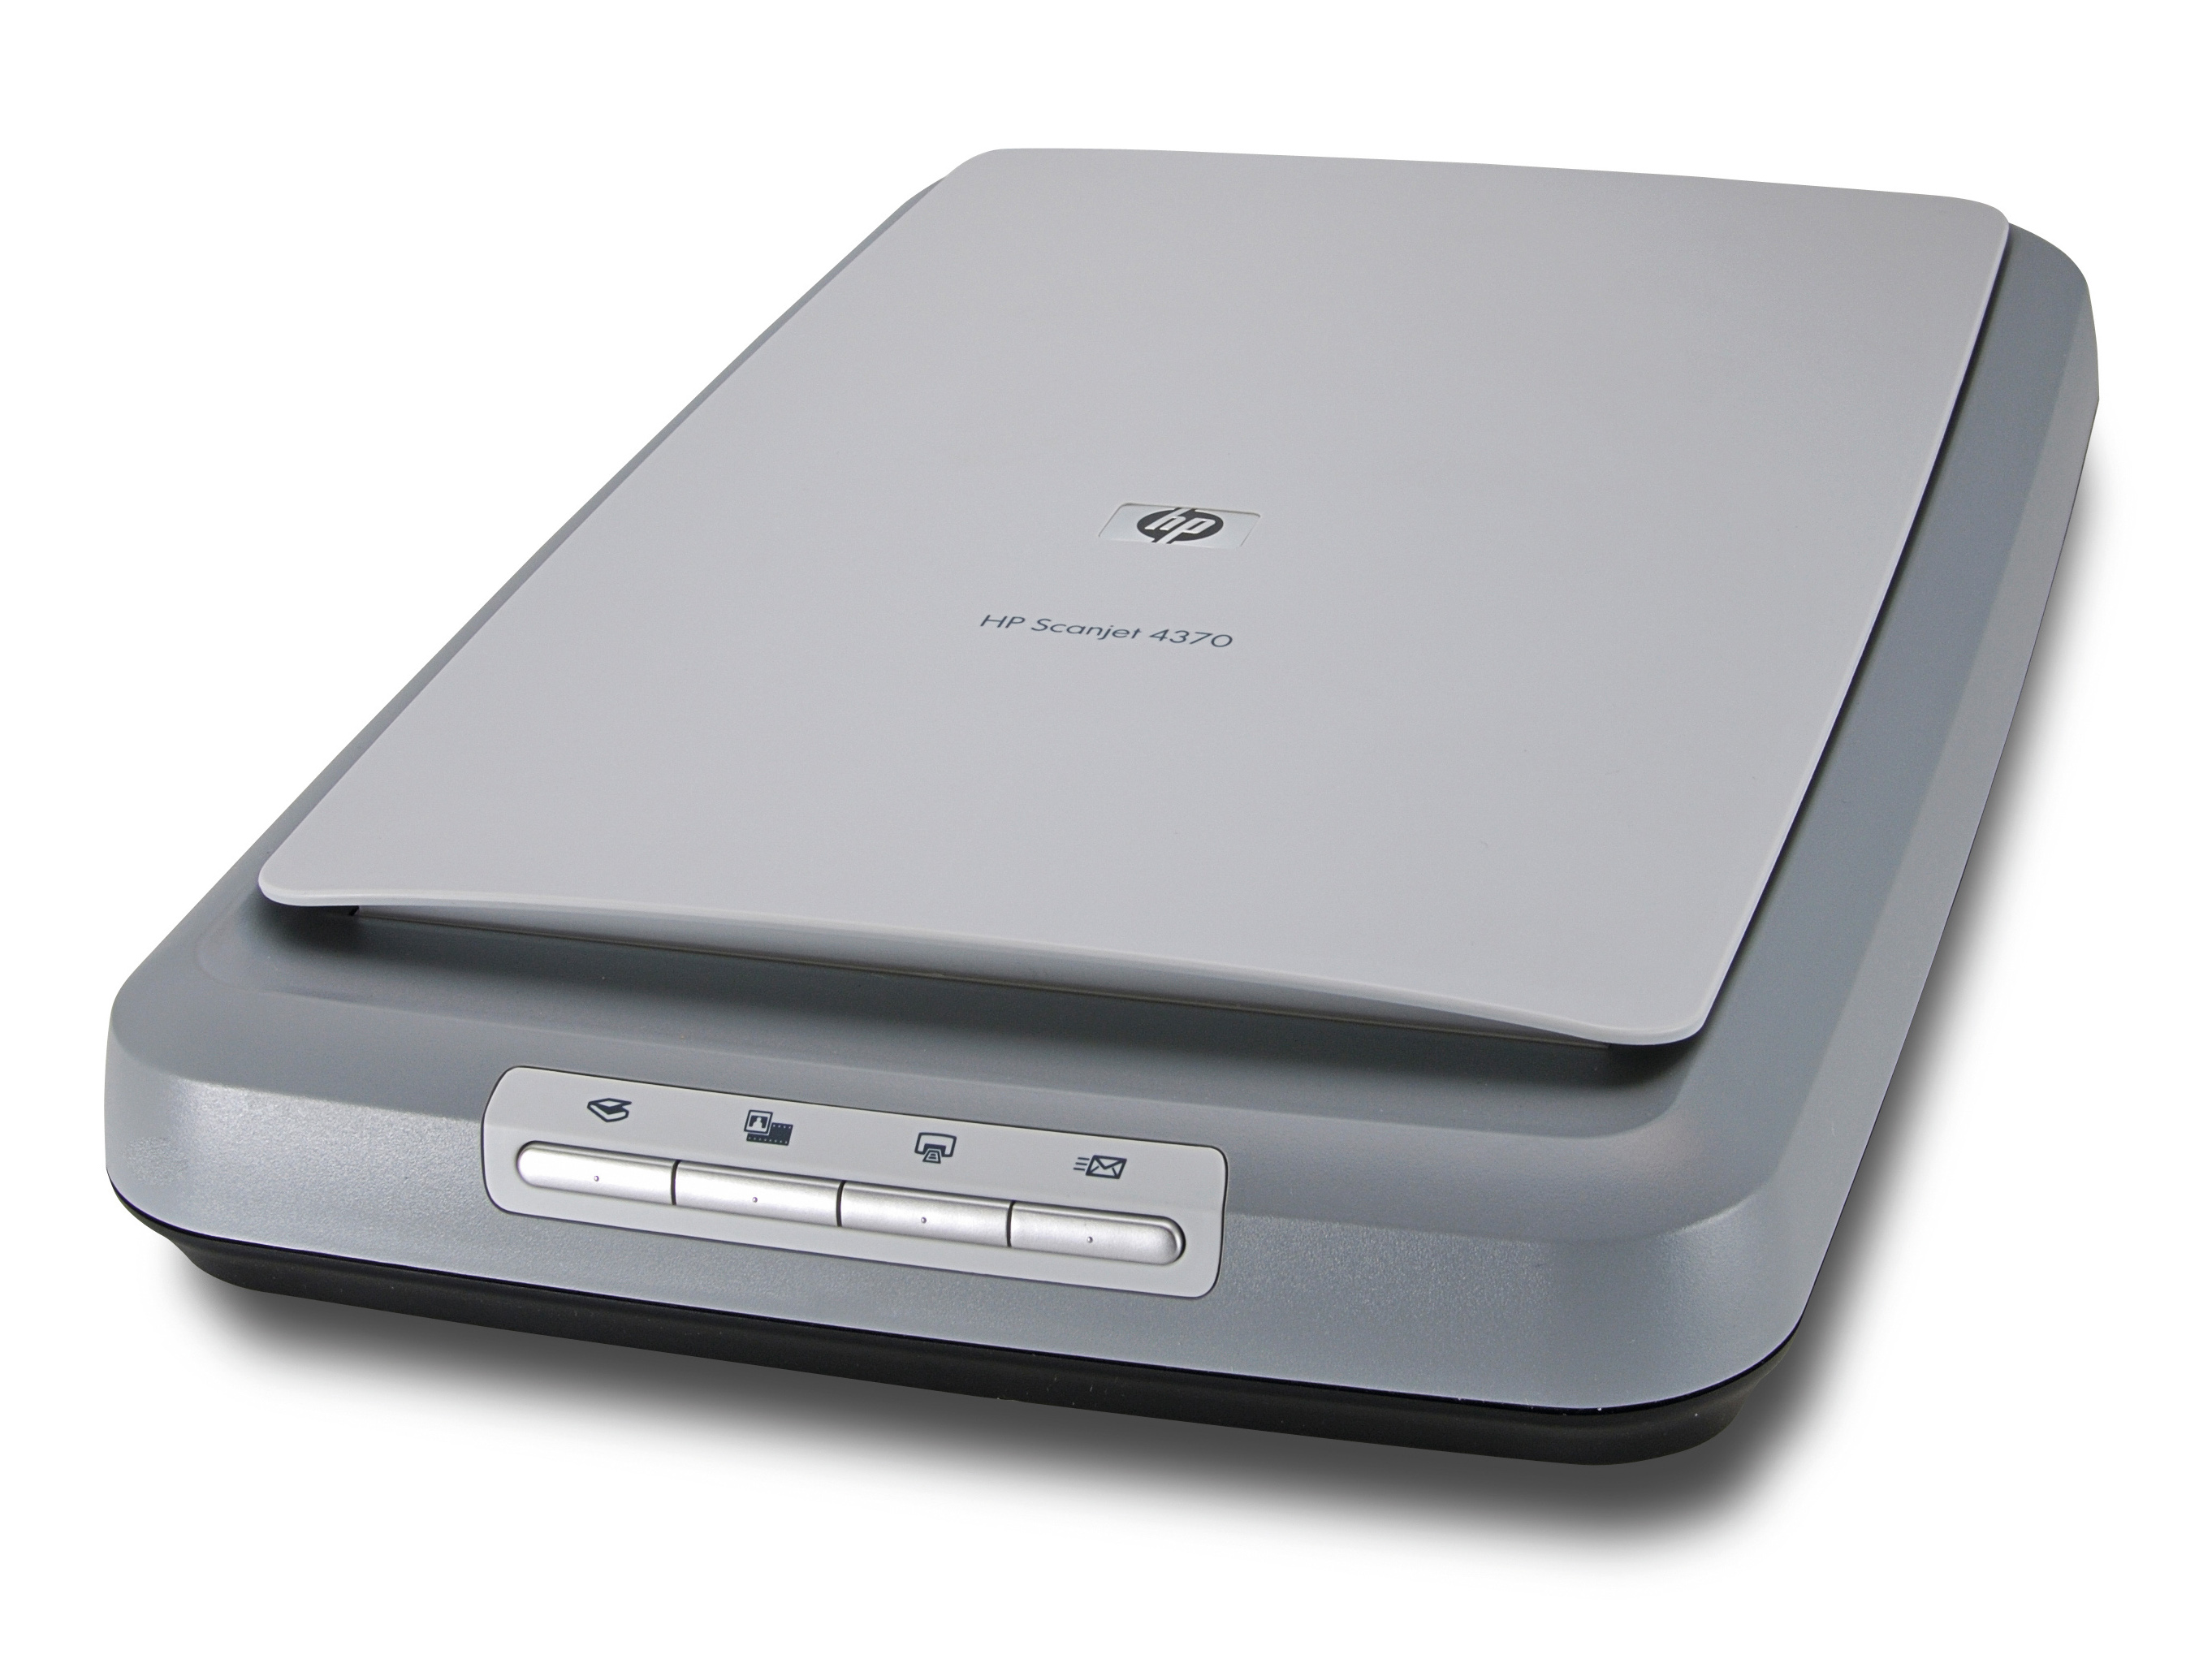 hp scanjet 2200c driver for windows 7